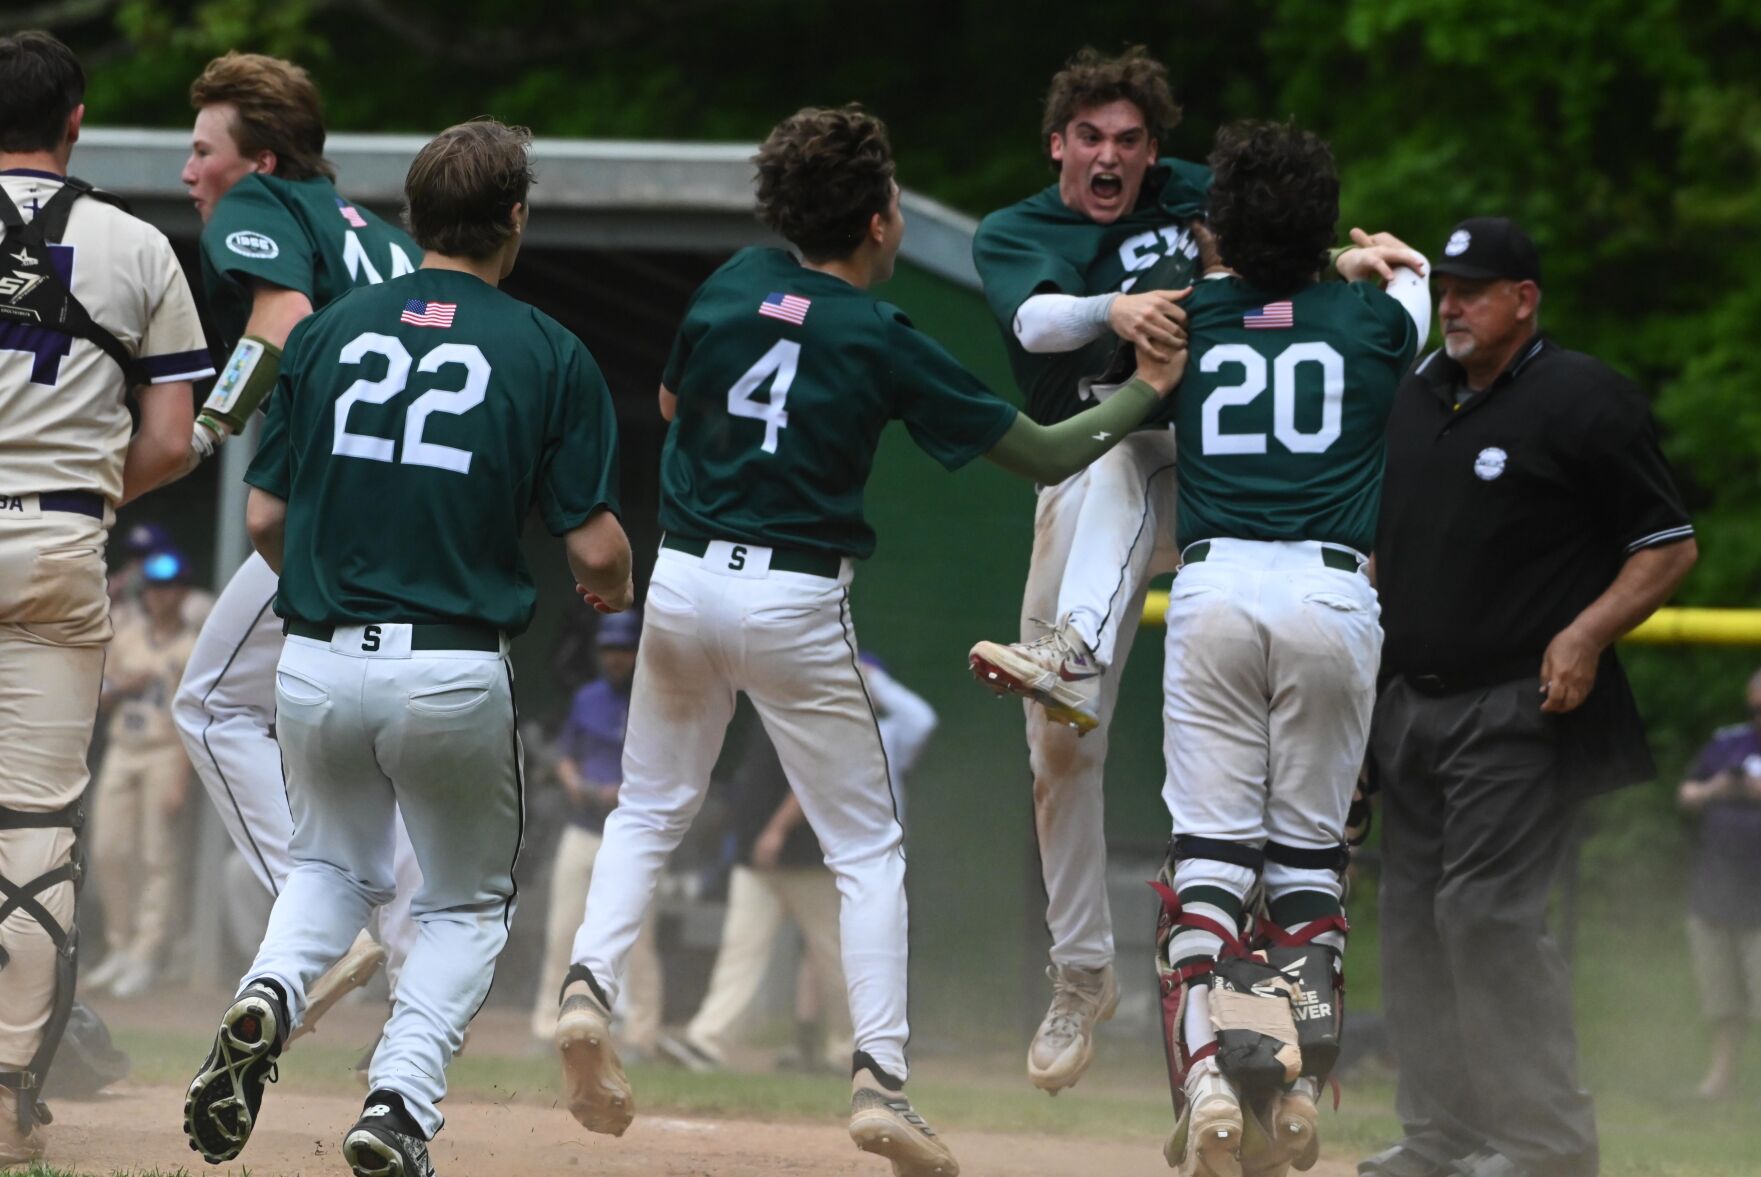 Shenendehowa’s Ian Oehlschlaeger Ends CBA No-Hitter with Walk-Off Single in Dramatic 2-1 Victory